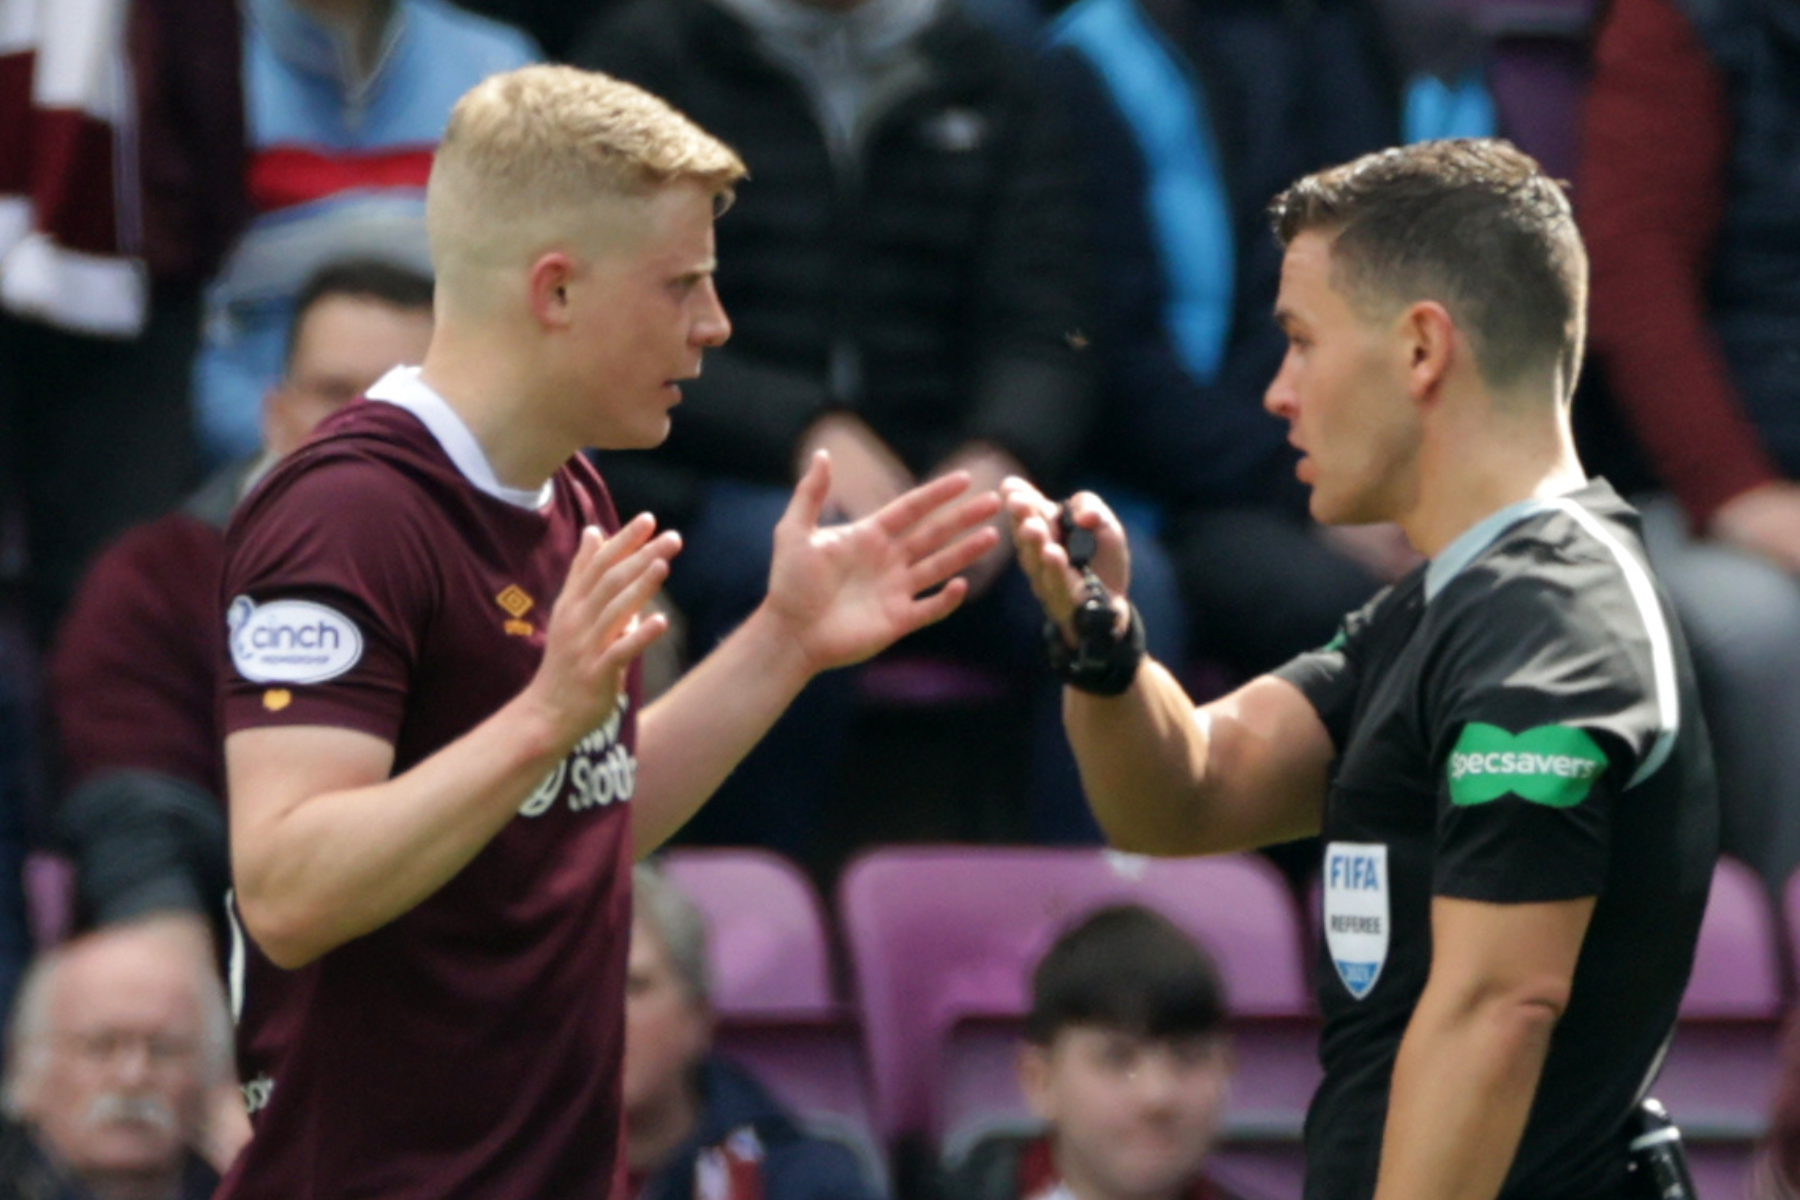 Hearts captain reveals reason for red card as he calls for VAR clarity